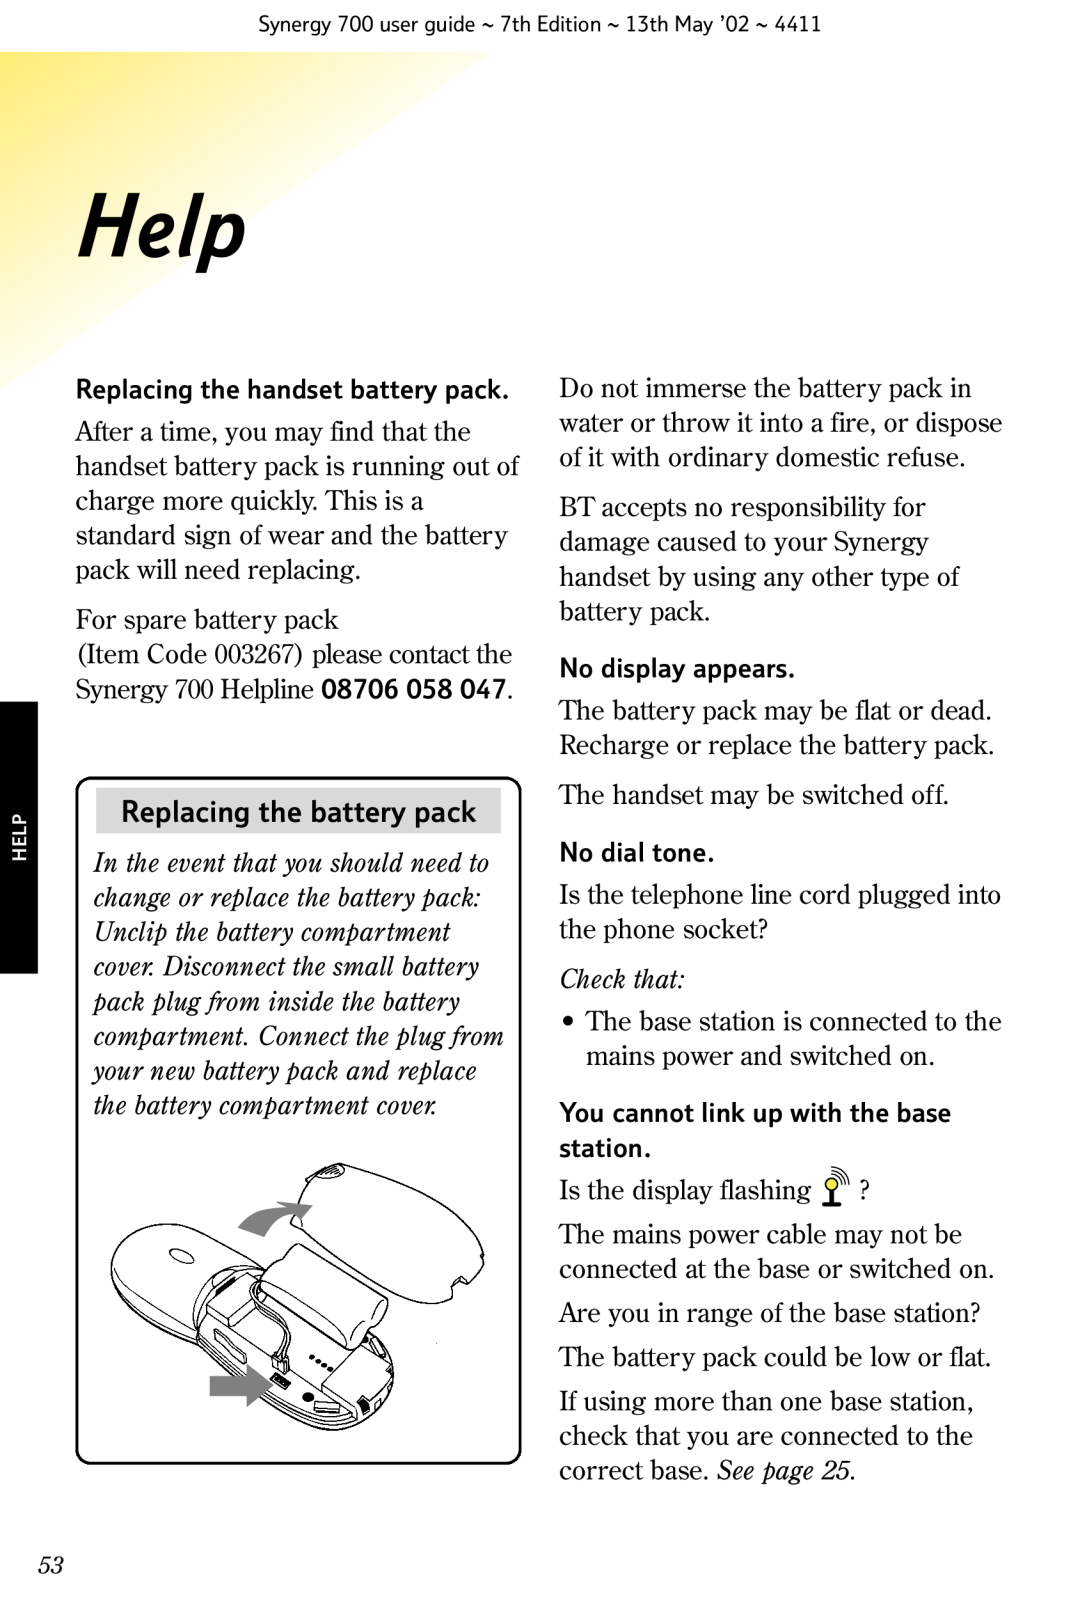 BT Synergy 700 Help, Replacing the battery pack, Replacing the handset battery pack, No display appears, No dial tone 